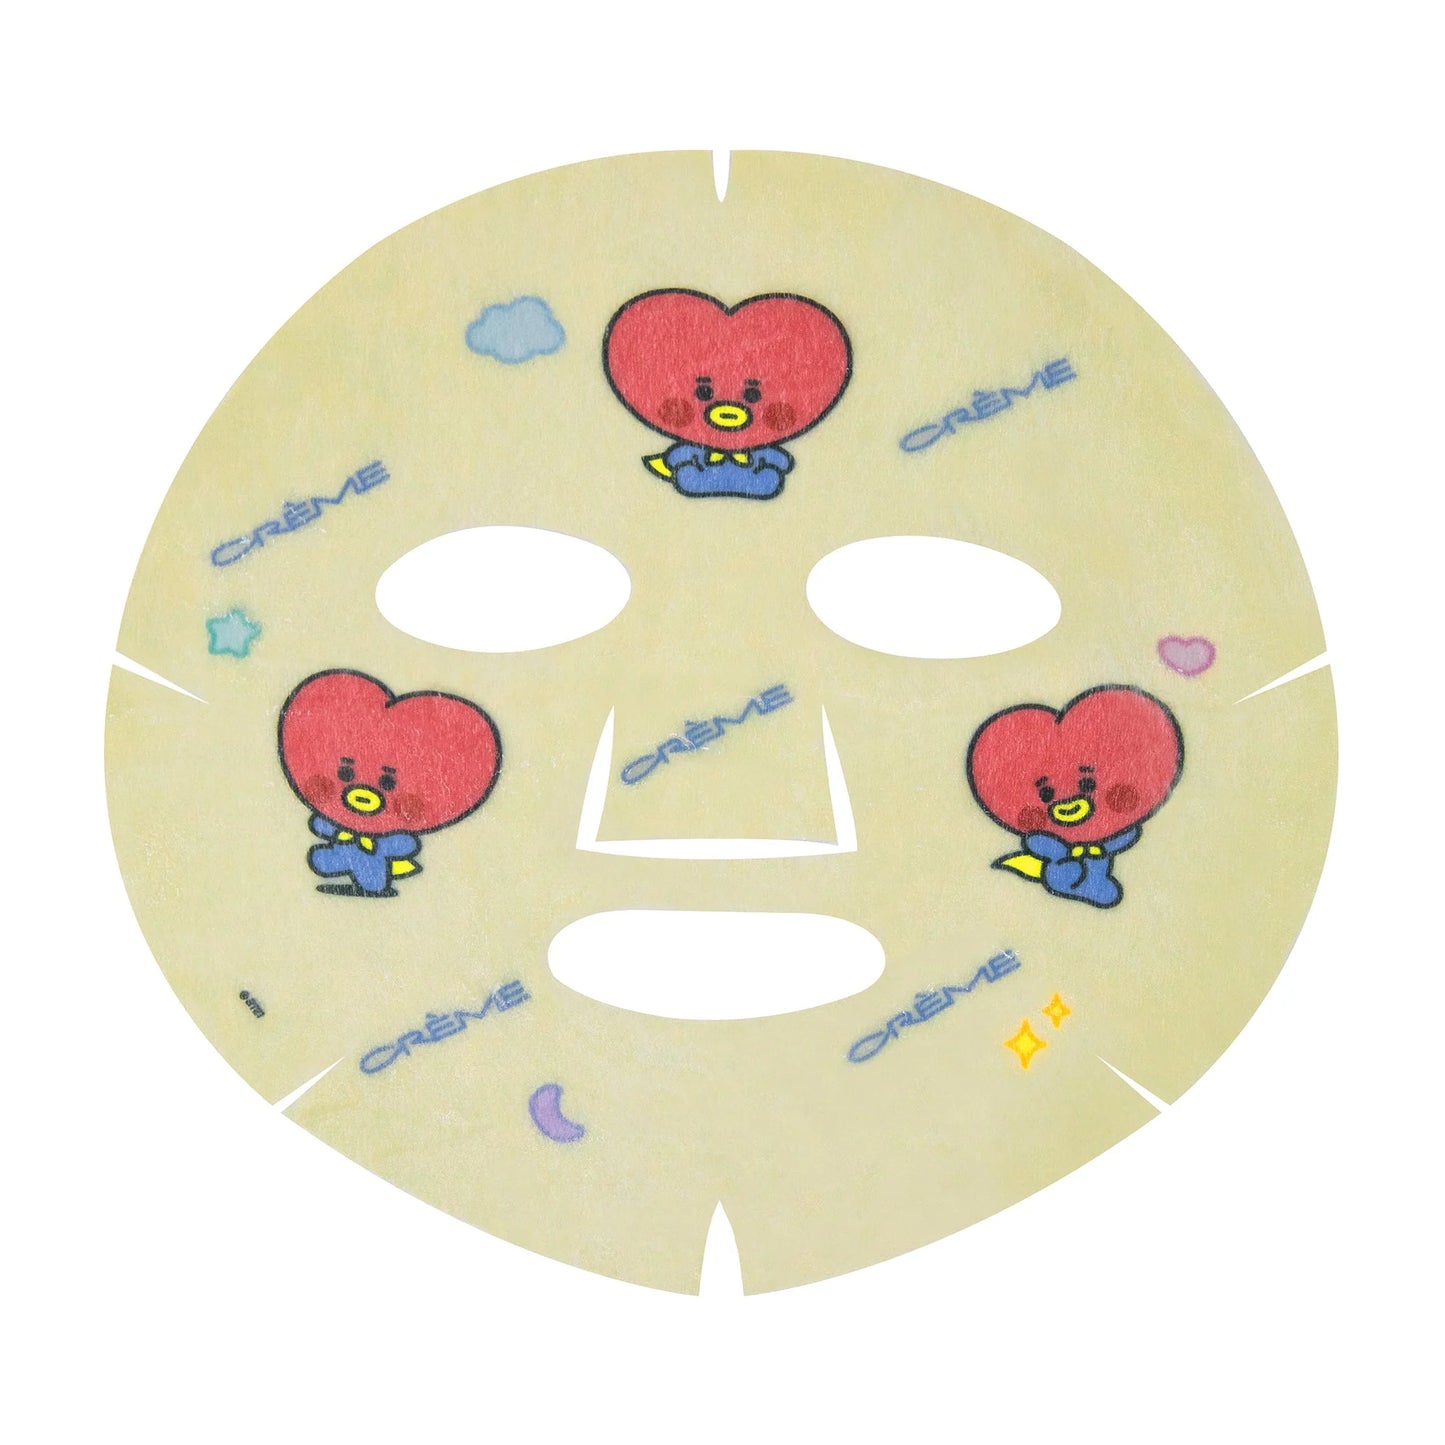 The Crème Shop x BT21 YOUTHFUL Like Baby TATA Printed Essence Sheet Mask (Allantoin, Milk Thistle, Strawberry Extract) BTS Army Take Two asian authentic genuine original korean skincare montreal toronto calgary canada thekshop thekshop.ca natural organic vegan cruelty-free cosmetics kbeauty vancouver free shipping clean beauty routine skin makeup kpop